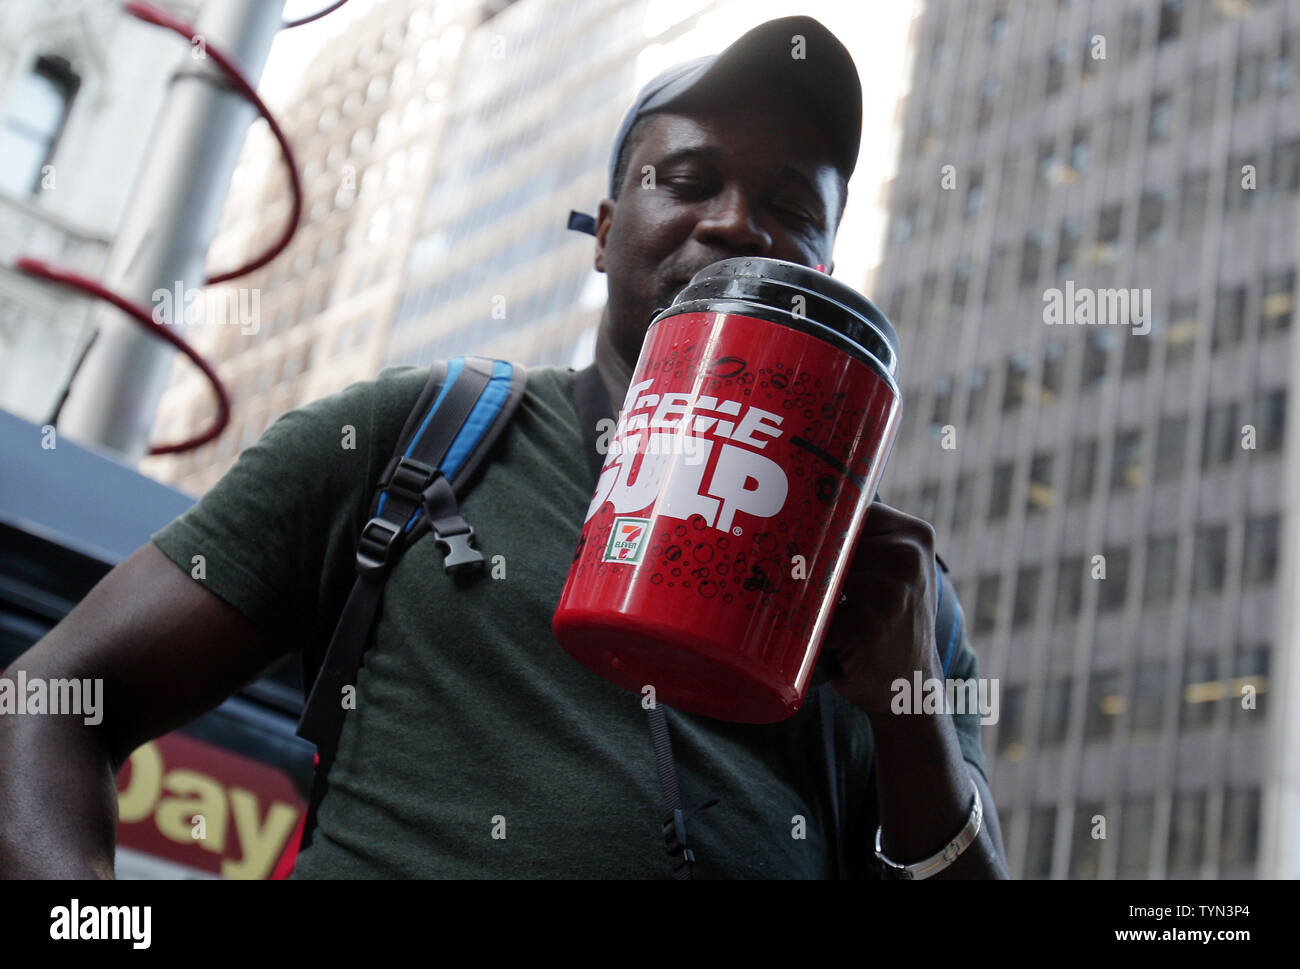 https://c8.alamy.com/comp/TYN3P4/protesters-hold-large-drinks-at-the-million-big-gulp-march-protest-organized-by-the-group-nyc-liberty-city-council-members-and-other-demonstrators-to-express-opposition-to-mayor-michael-r-bloombergs-proposal-to-prohibit-licensed-food-service-establishments-from-using-containers-larger-than-16-ounces-to-serve-high-calorie-drinks-at-city-hall-park-in-new-york-city-on-july-9-2012-the-proposed-first-in-the-nation-ban-would-impose-a-16-ounce-limit-on-the-size-of-sweetened-drinks-sold-at-restaurants-movie-theaters-sports-venues-and-street-carts-it-would-apply-to-bottled-drinks-as-well-as-f-TYN3P4.jpg